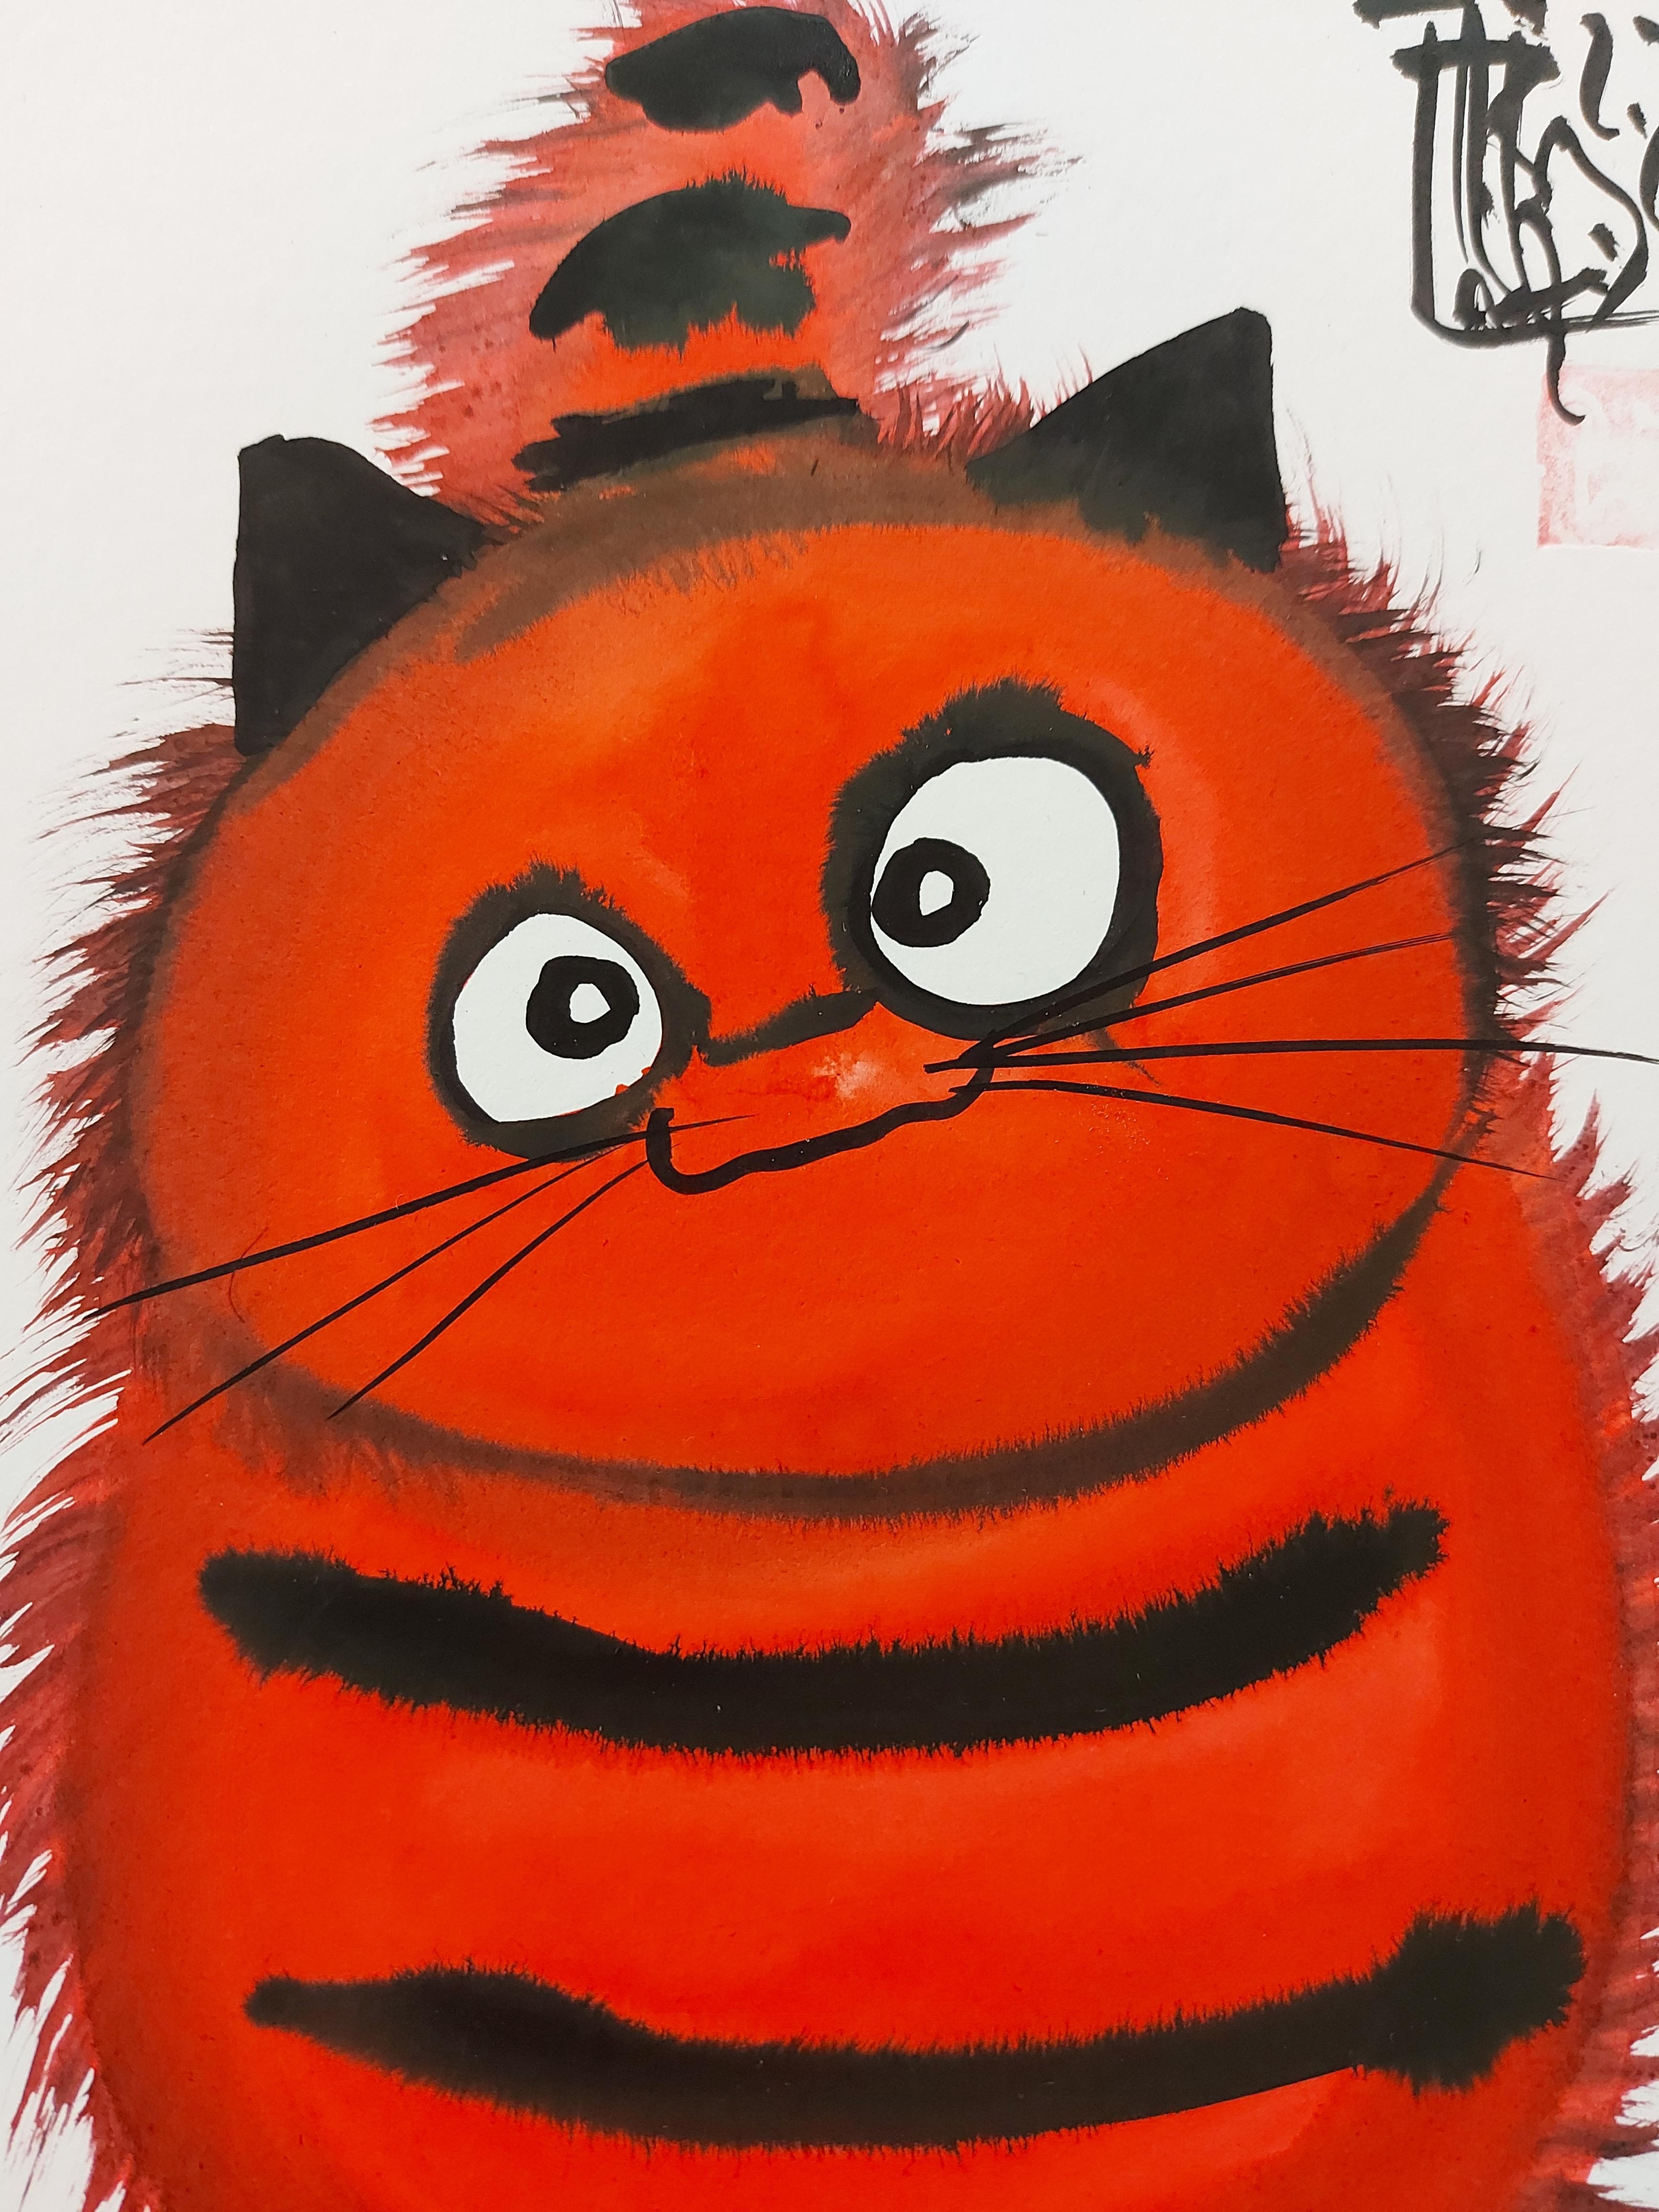 Big Red Cat Waiting for a Game - Handsigned Original Ink Drawing  - Gray Animal Art by Laszlo Tibay